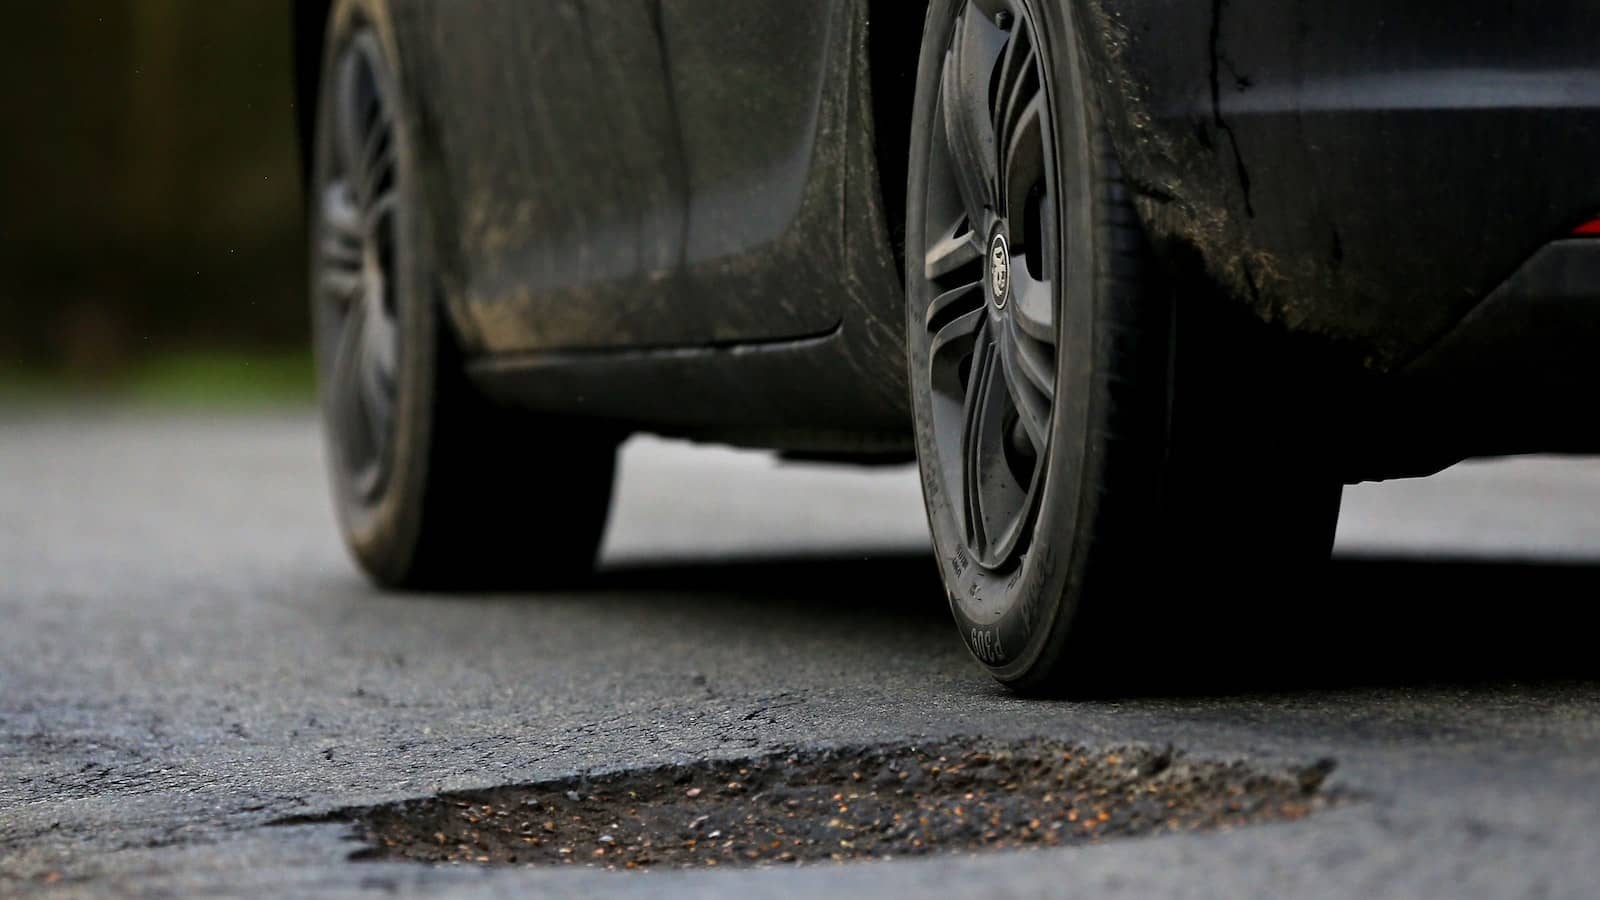 Tyre wear causes significant pollution